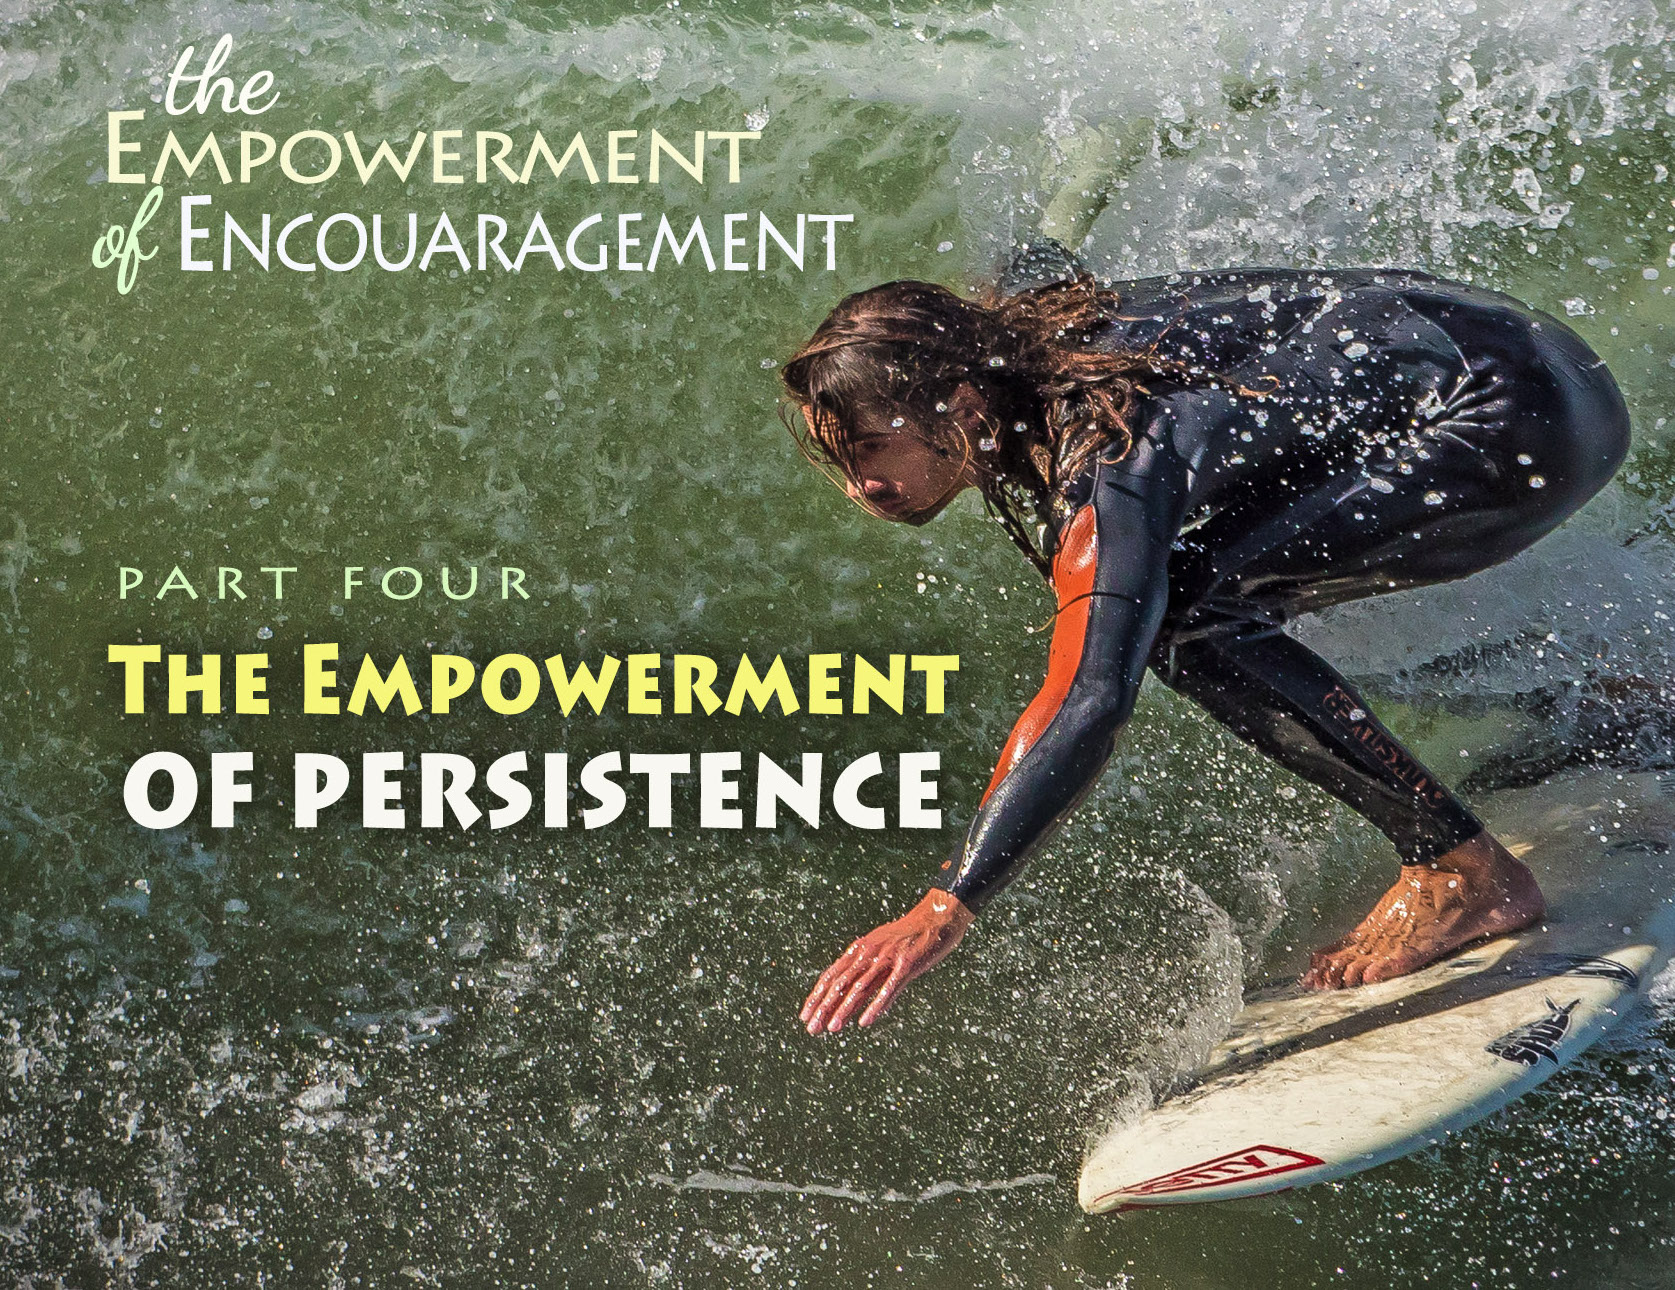 The Empowerment of Persistence